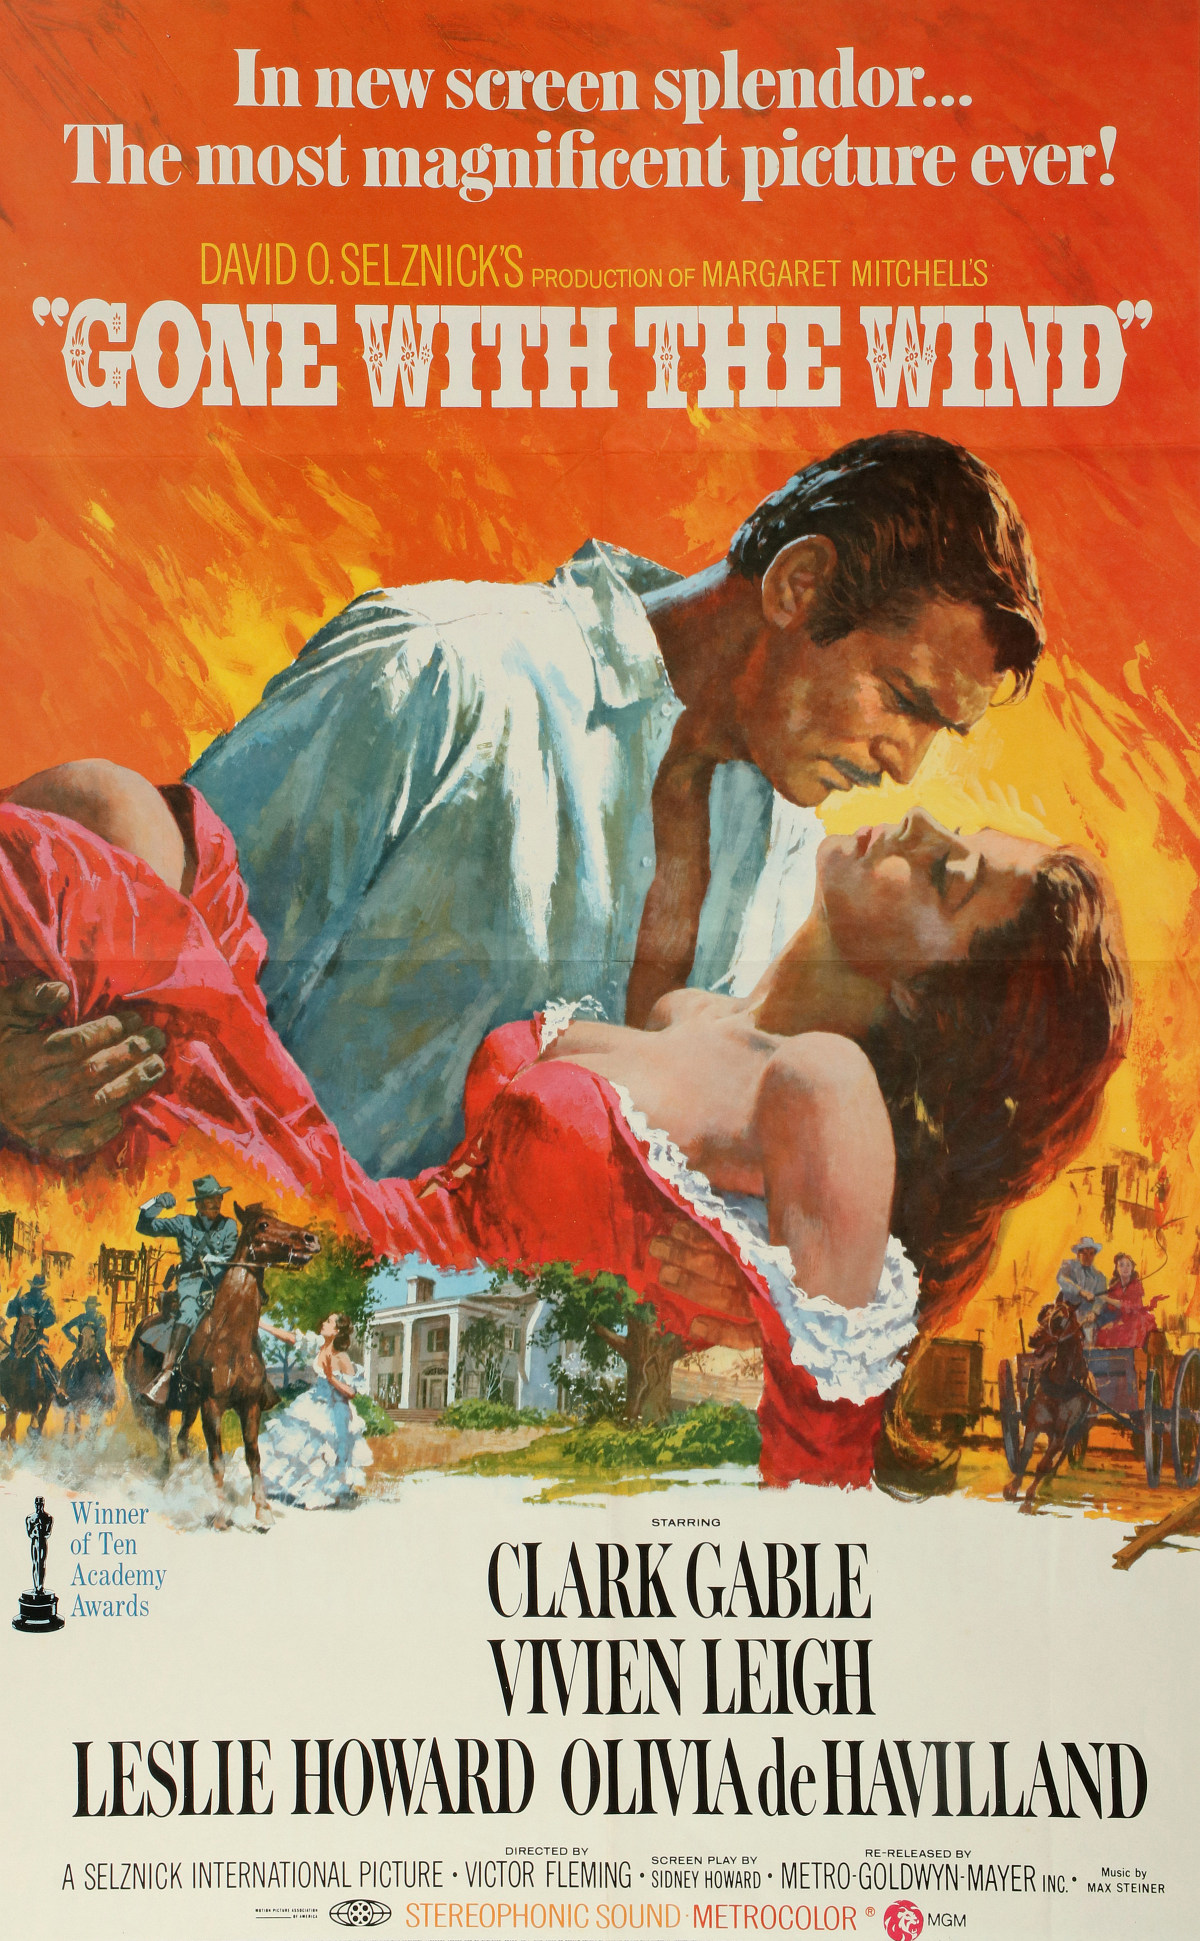 A 1970 'GONE WITH THE WIND' THEATRICAL RE-RELEASE POSTR